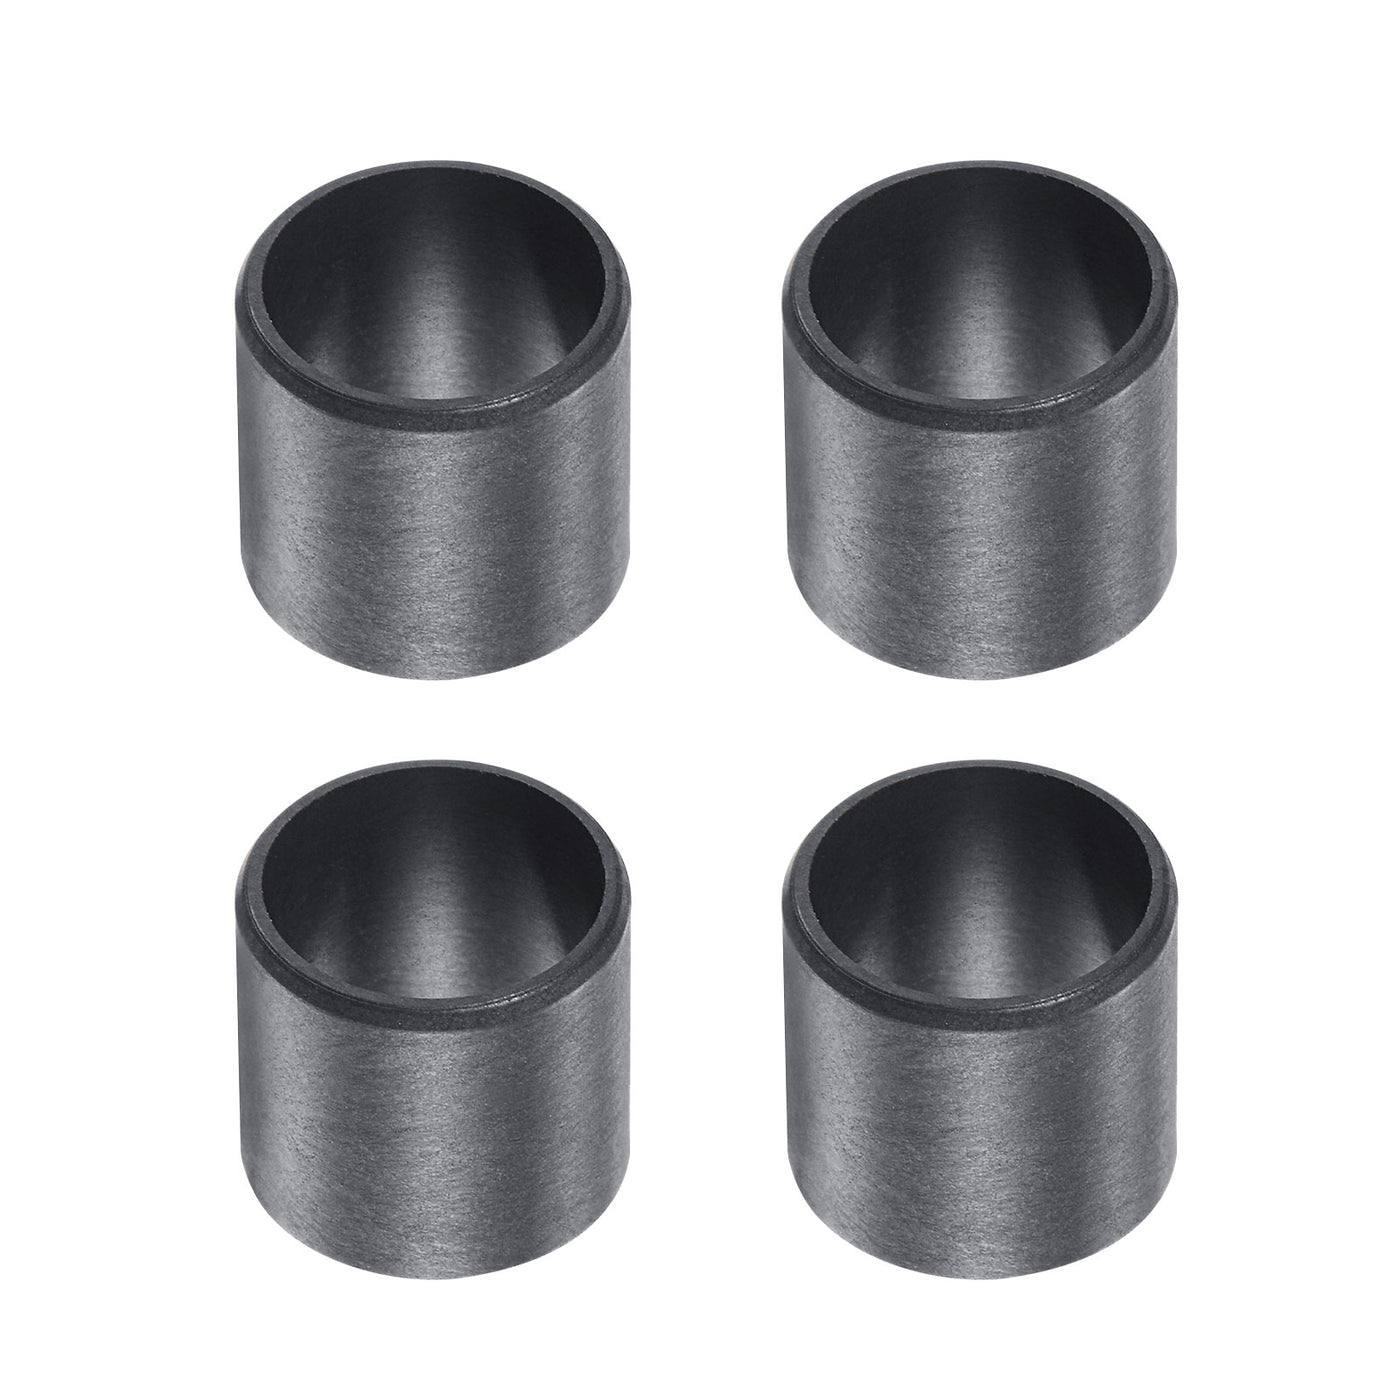 uxcell Uxcell Sleeve Bearings 12mmx14mmx10mm POM Wrapped Oilless Bushings Black 4pcs